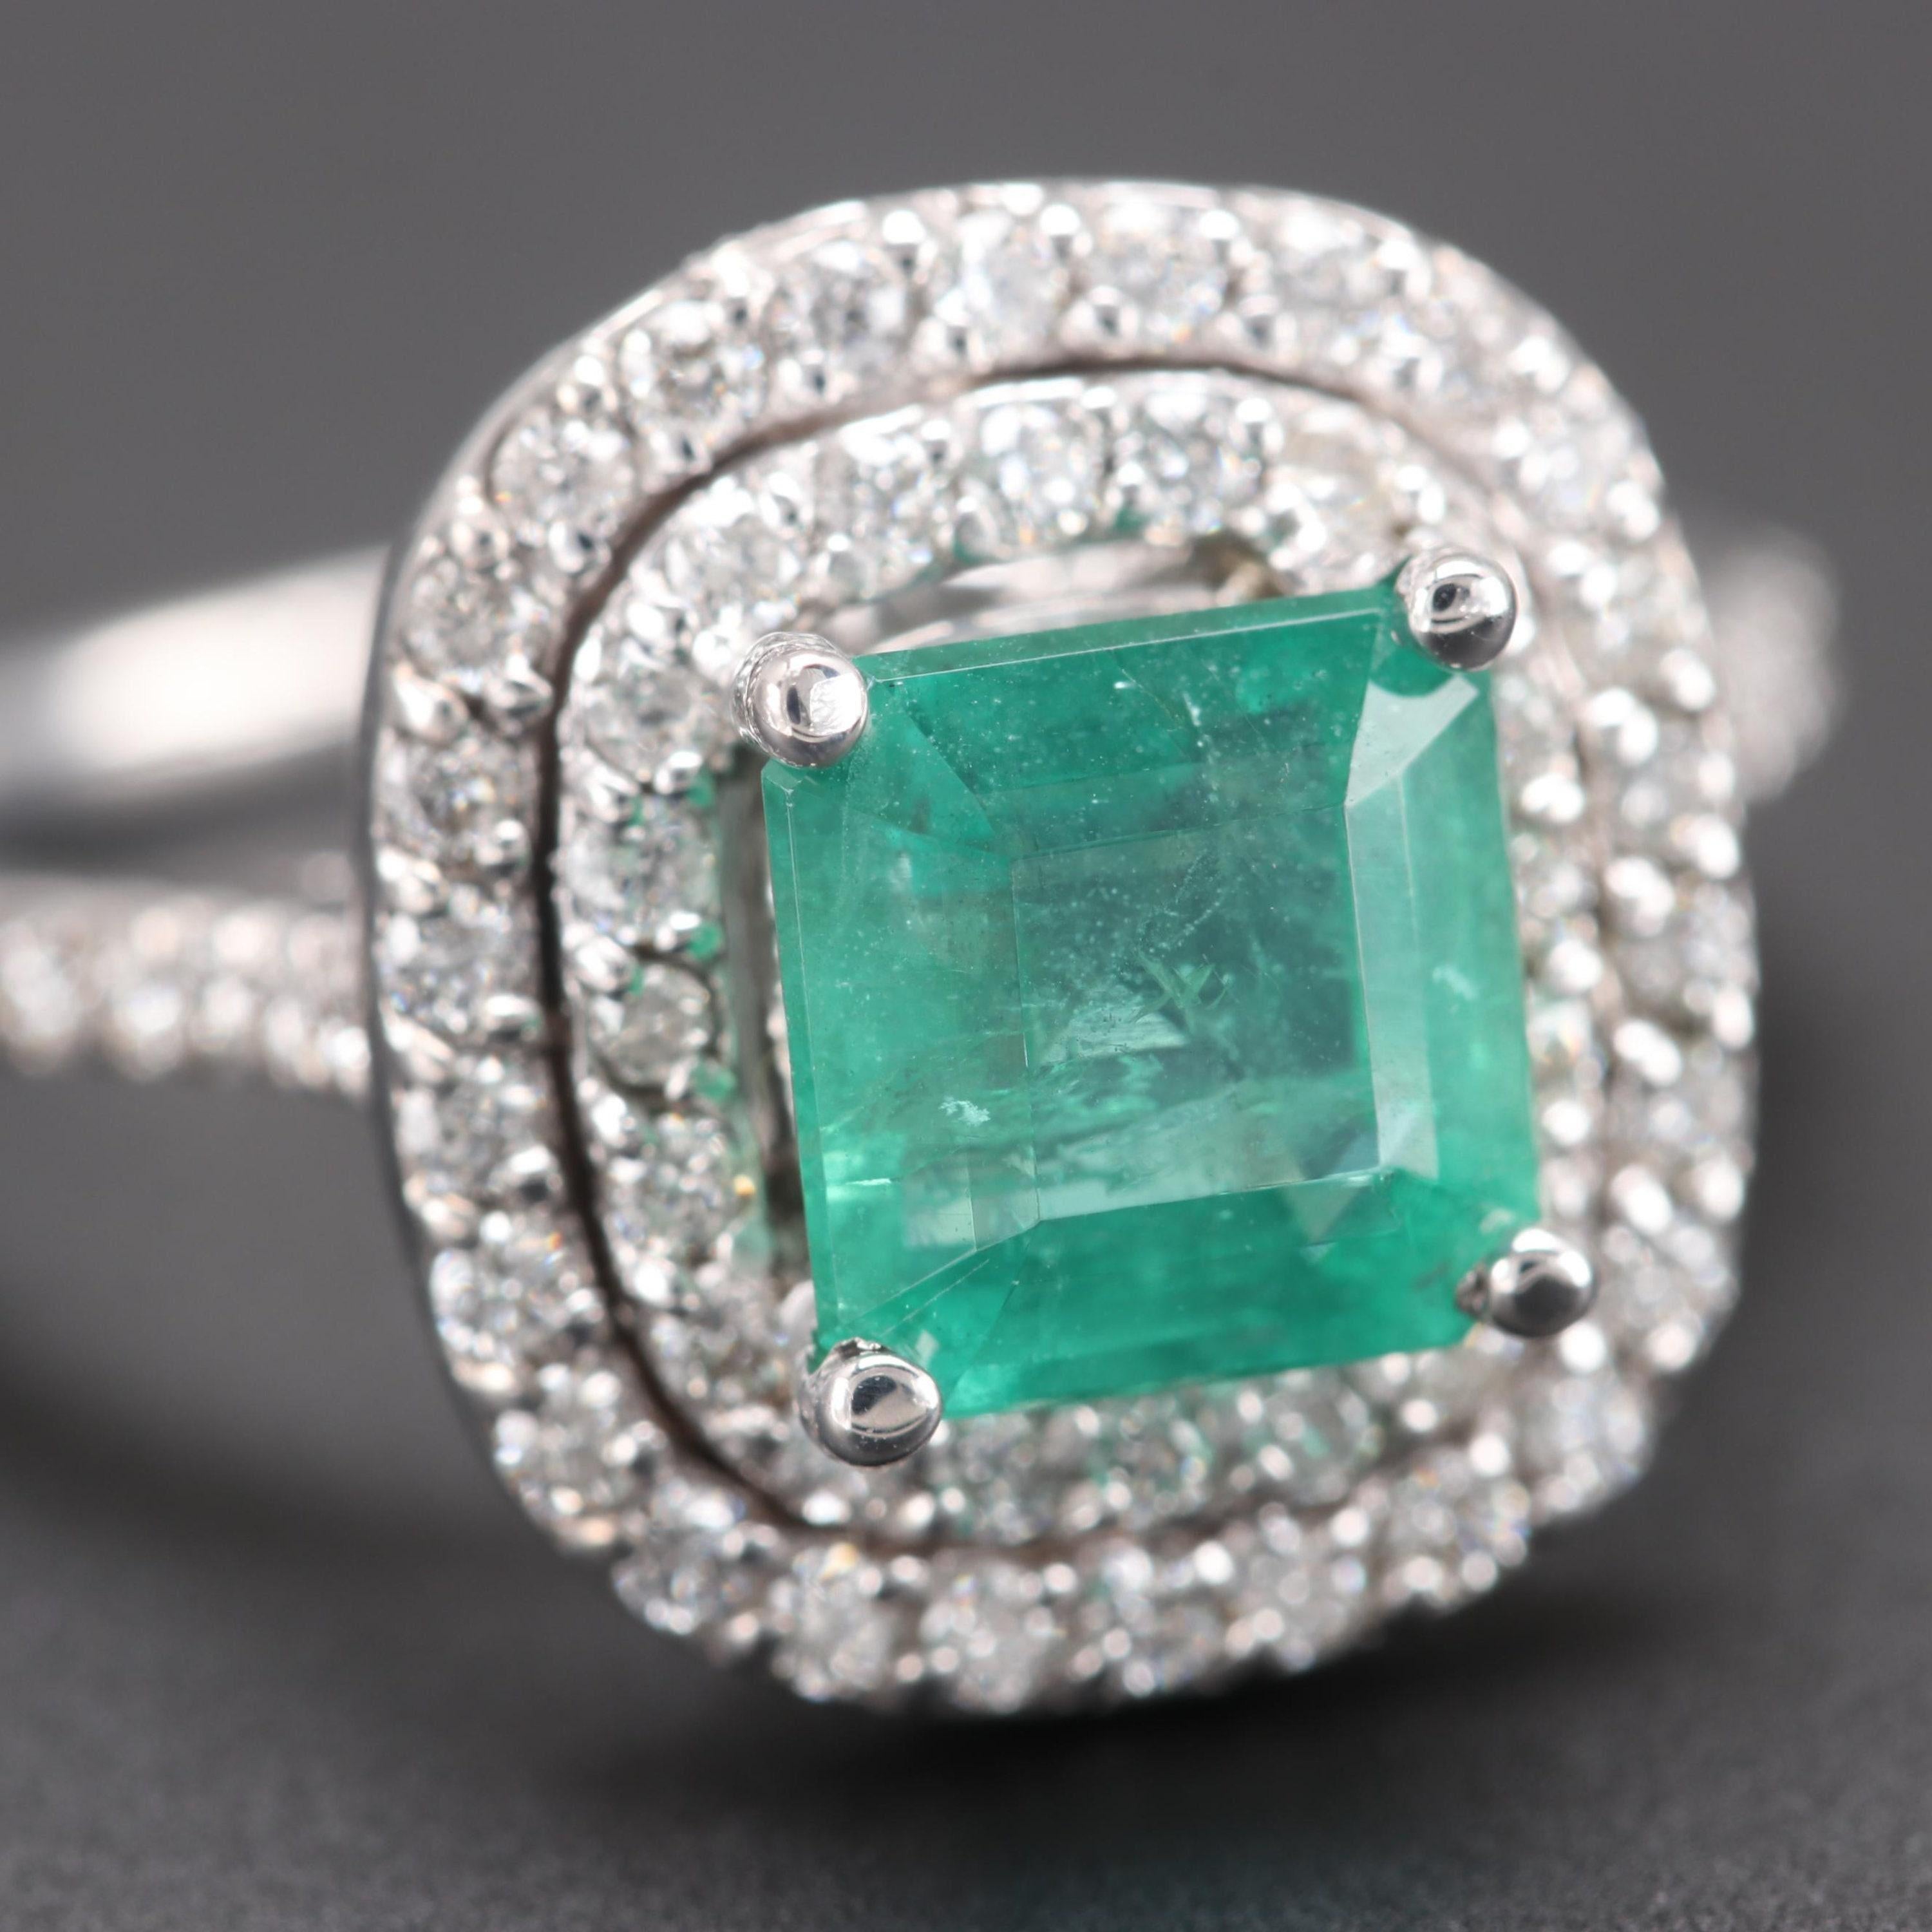 For Sale:  Art Deco Natural Emerald Diamond Engagement Ring Set in 18K Gold, Cocktail Ring 6